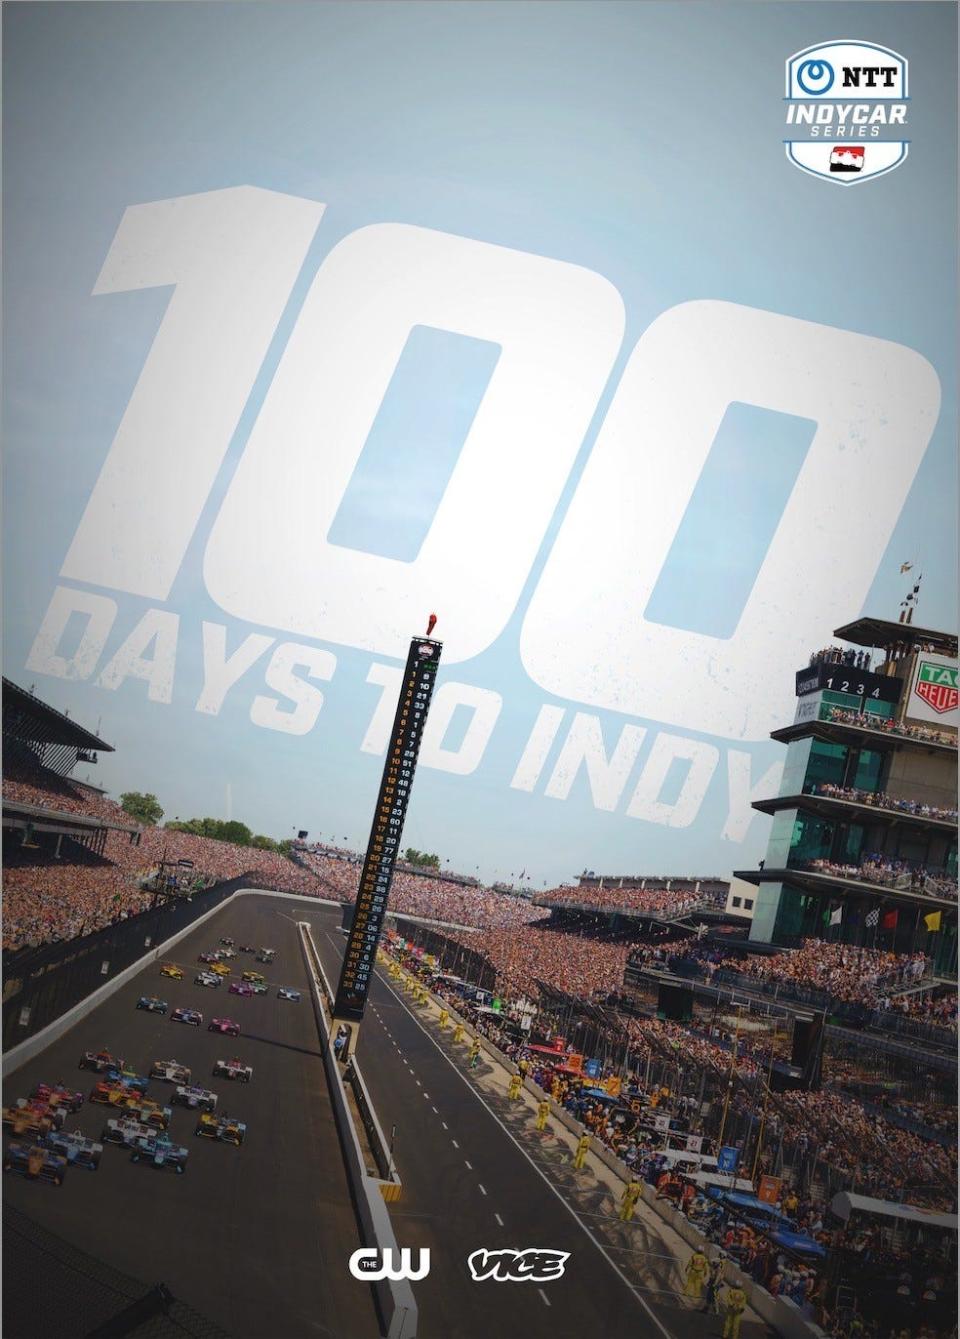 IndyCar has landed a six-episode docuseries deal to be produced by VICE and air on The CW this spring around the leadup to the 2023 Indy 500.